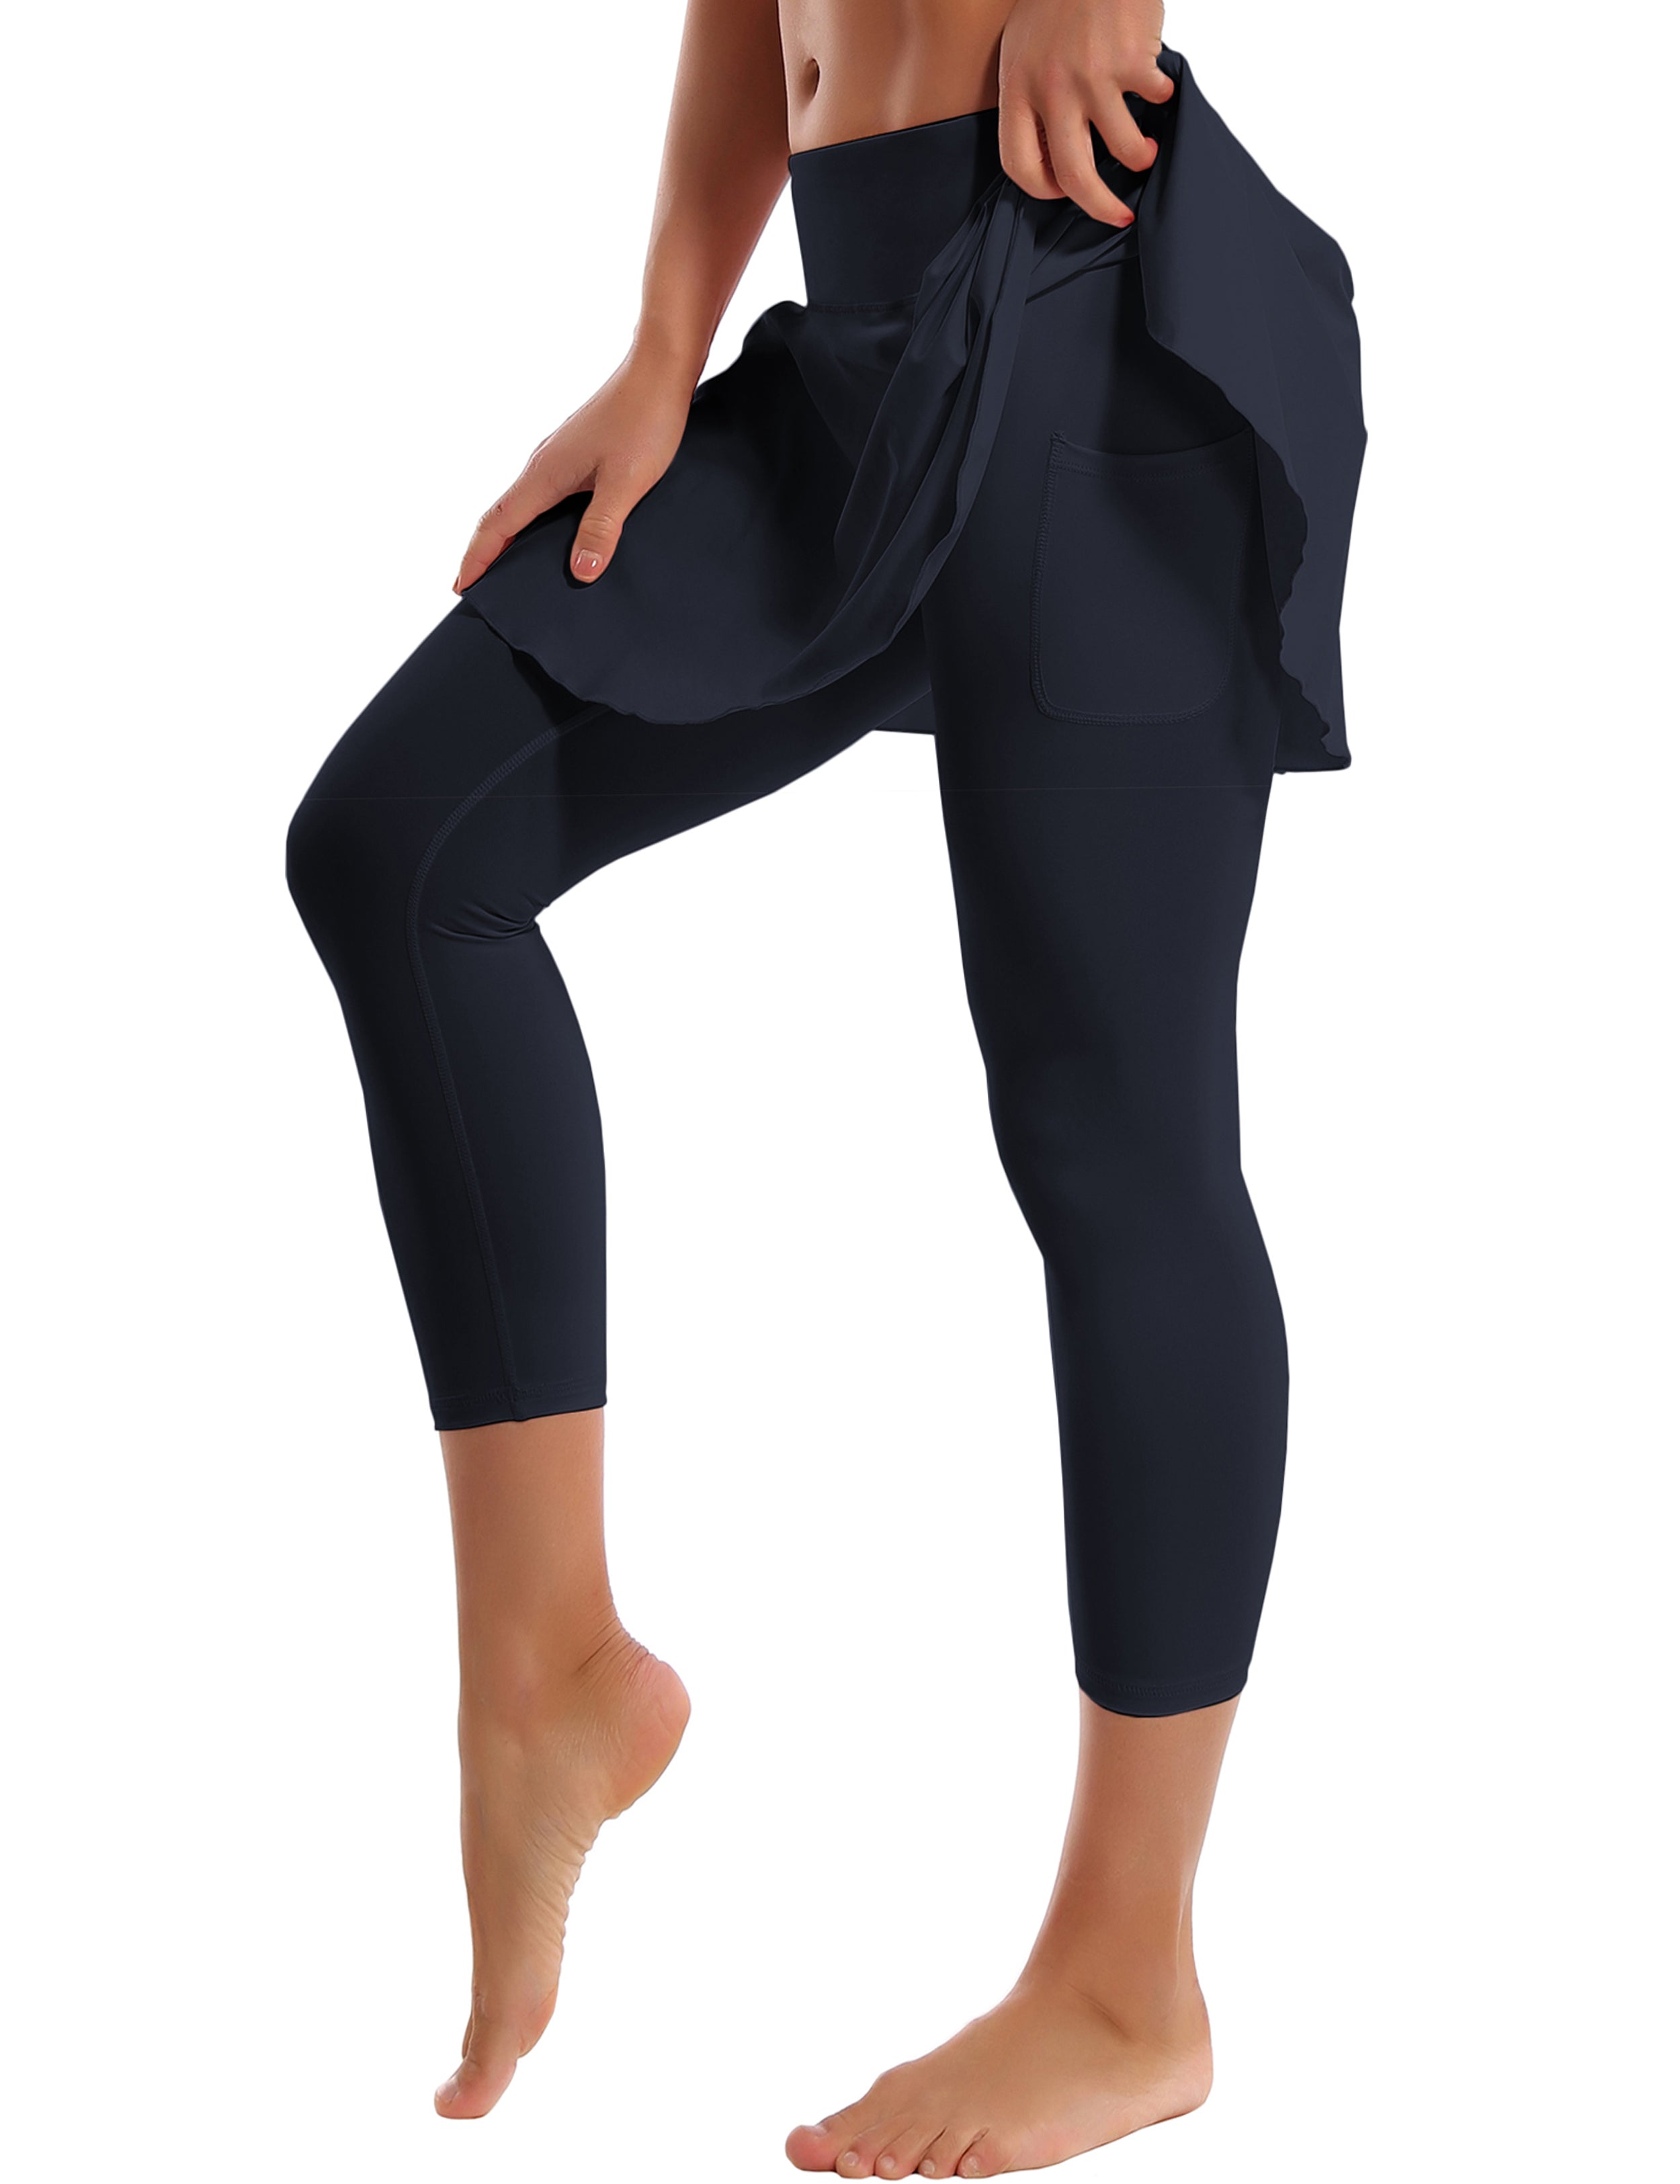 19" Capris Tennis Golf Skirted Leggings with Pockets darknavy 80%Nylon/20%Spandex UPF 50+ sun protection Elastic closure Lightweight, Wrinkle Moisture wicking Quick drying Secure & comfortable two layer Hidden pocket